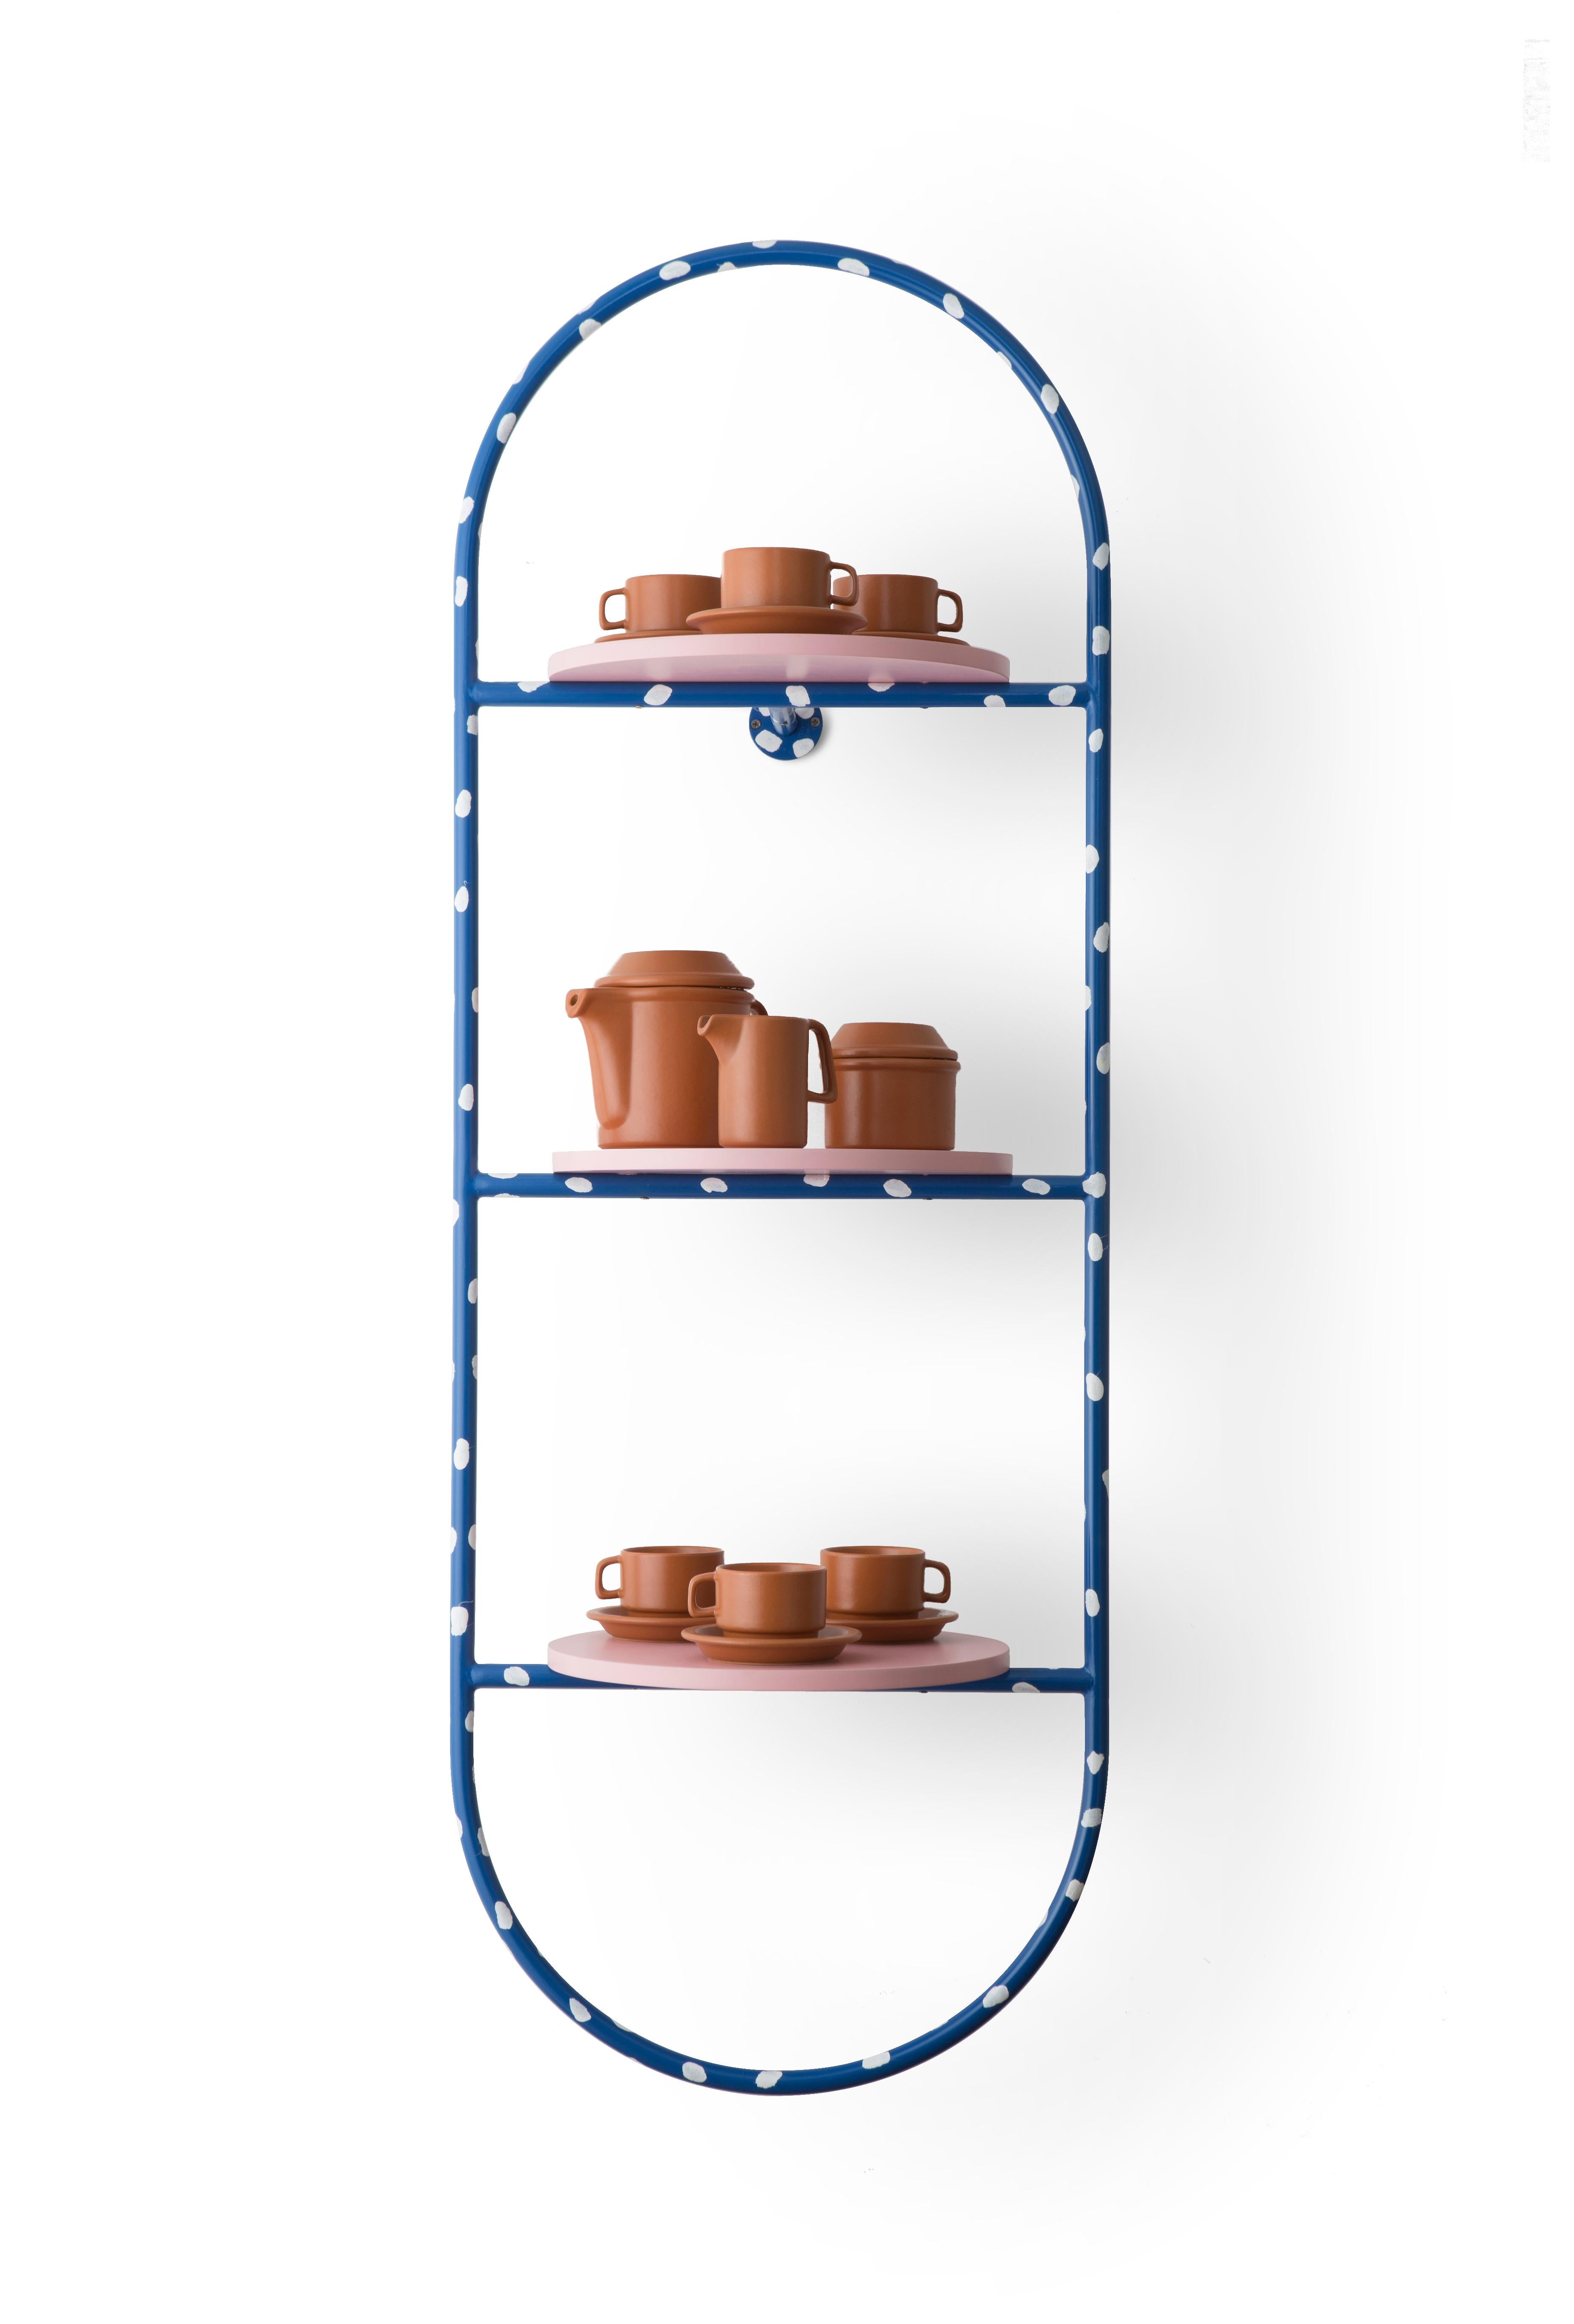 Graceful and delicate, the Teteia wall shelf is a suspended shelf that behaves well in any Habitat, allowing several possibilities of use. Its colors and shapes reveal a playful character. It's no wonder the painting on this shelf is finished by